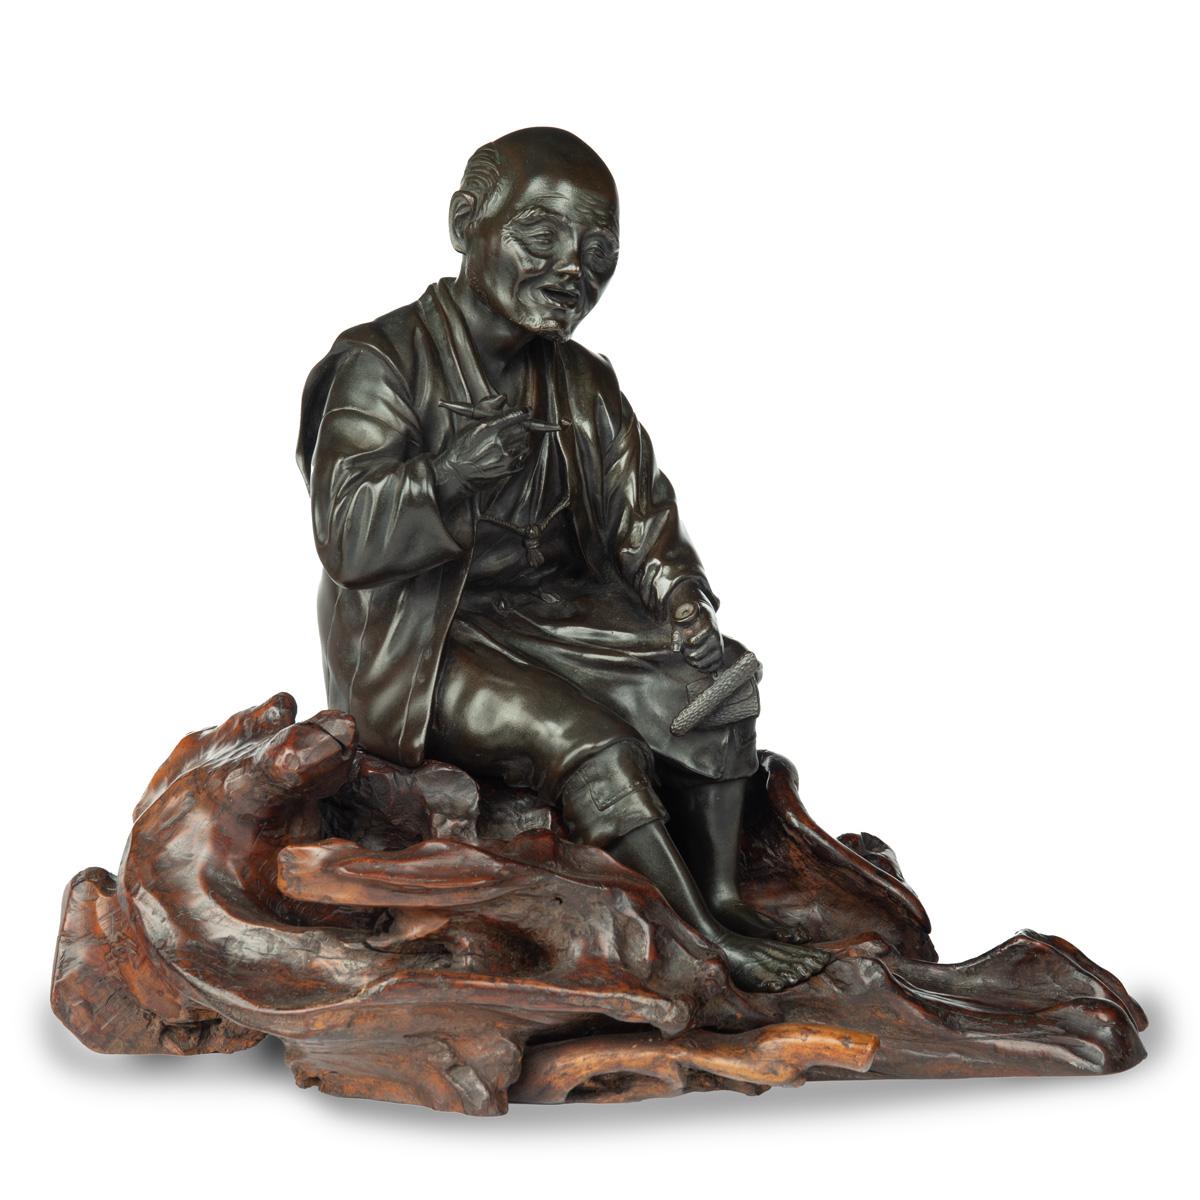 A Meiji period bronze of a seated man smoking, shown with his pipe in his right hand resting on a rootwood base, wearing workman’s clothing with bare feet, the face expressively carved,  signed in a seal 暁光作 Gyoko saku  [Made by Gyoko].  Japanese,